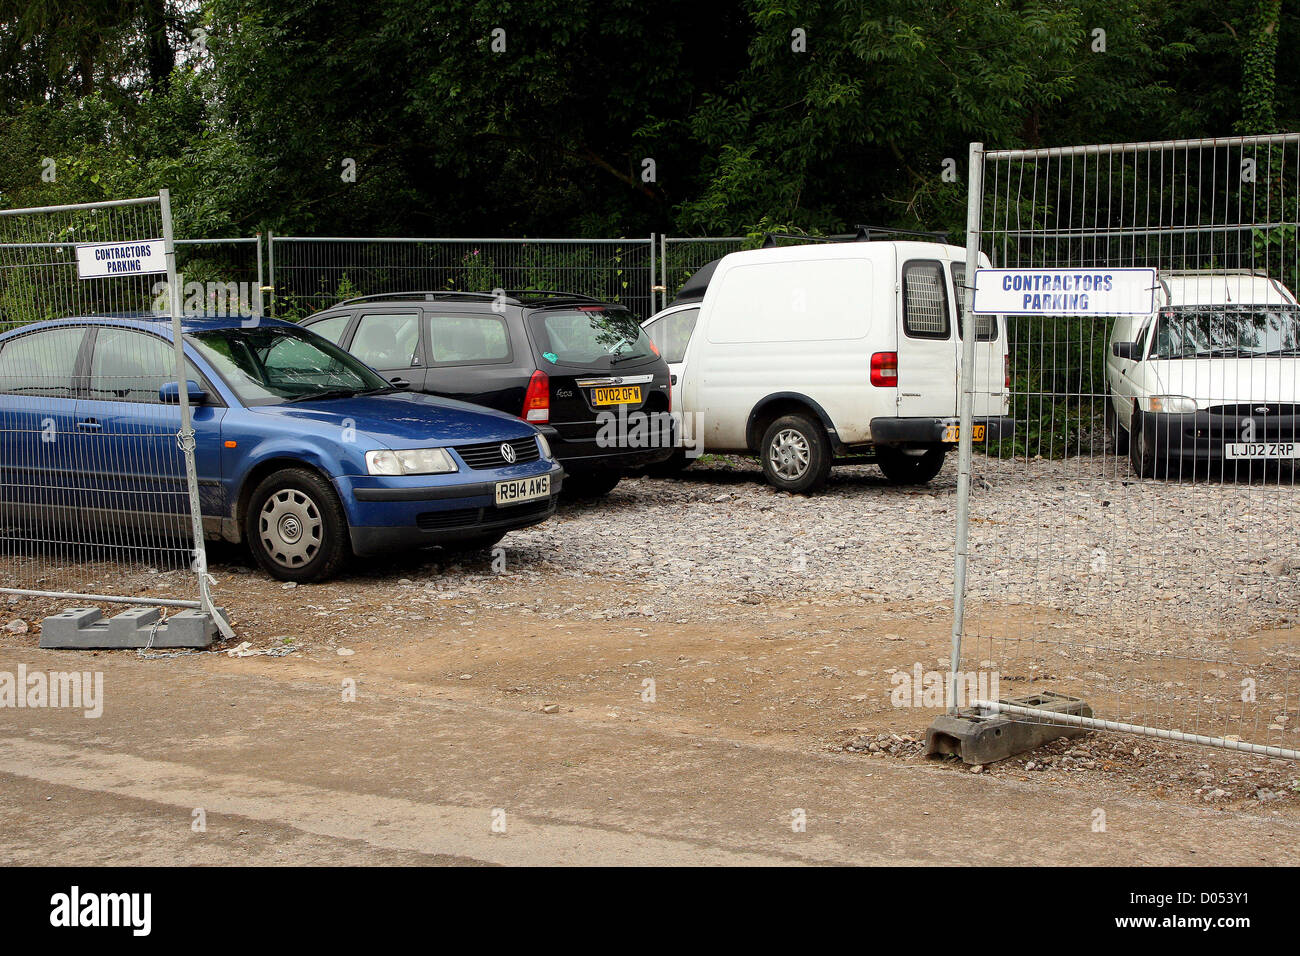 Temporary fenced car park used by construction workers Stock Photo